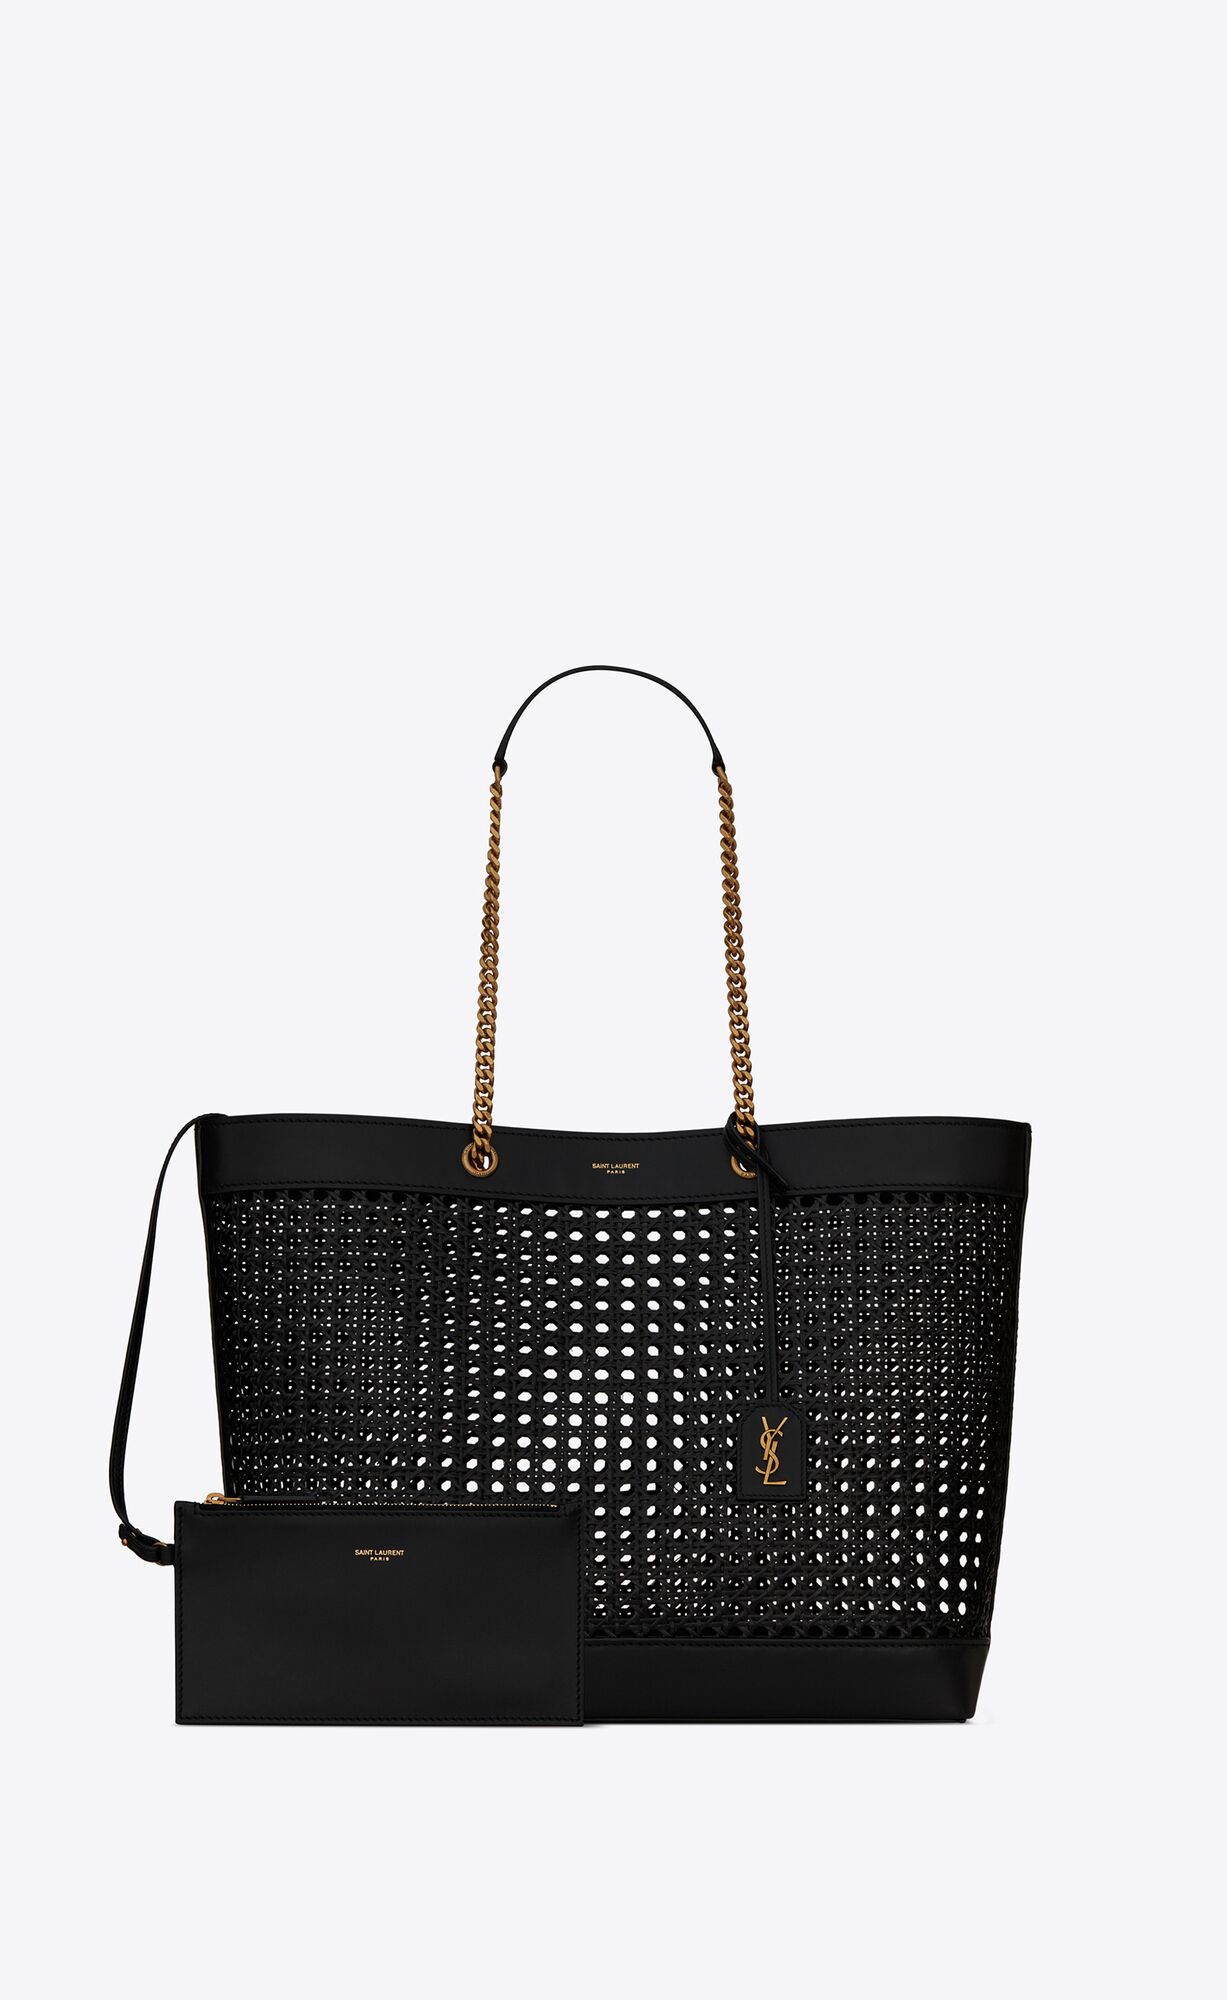 Saint laurent E/W shopping bag in woven cane and leather | Saint ...